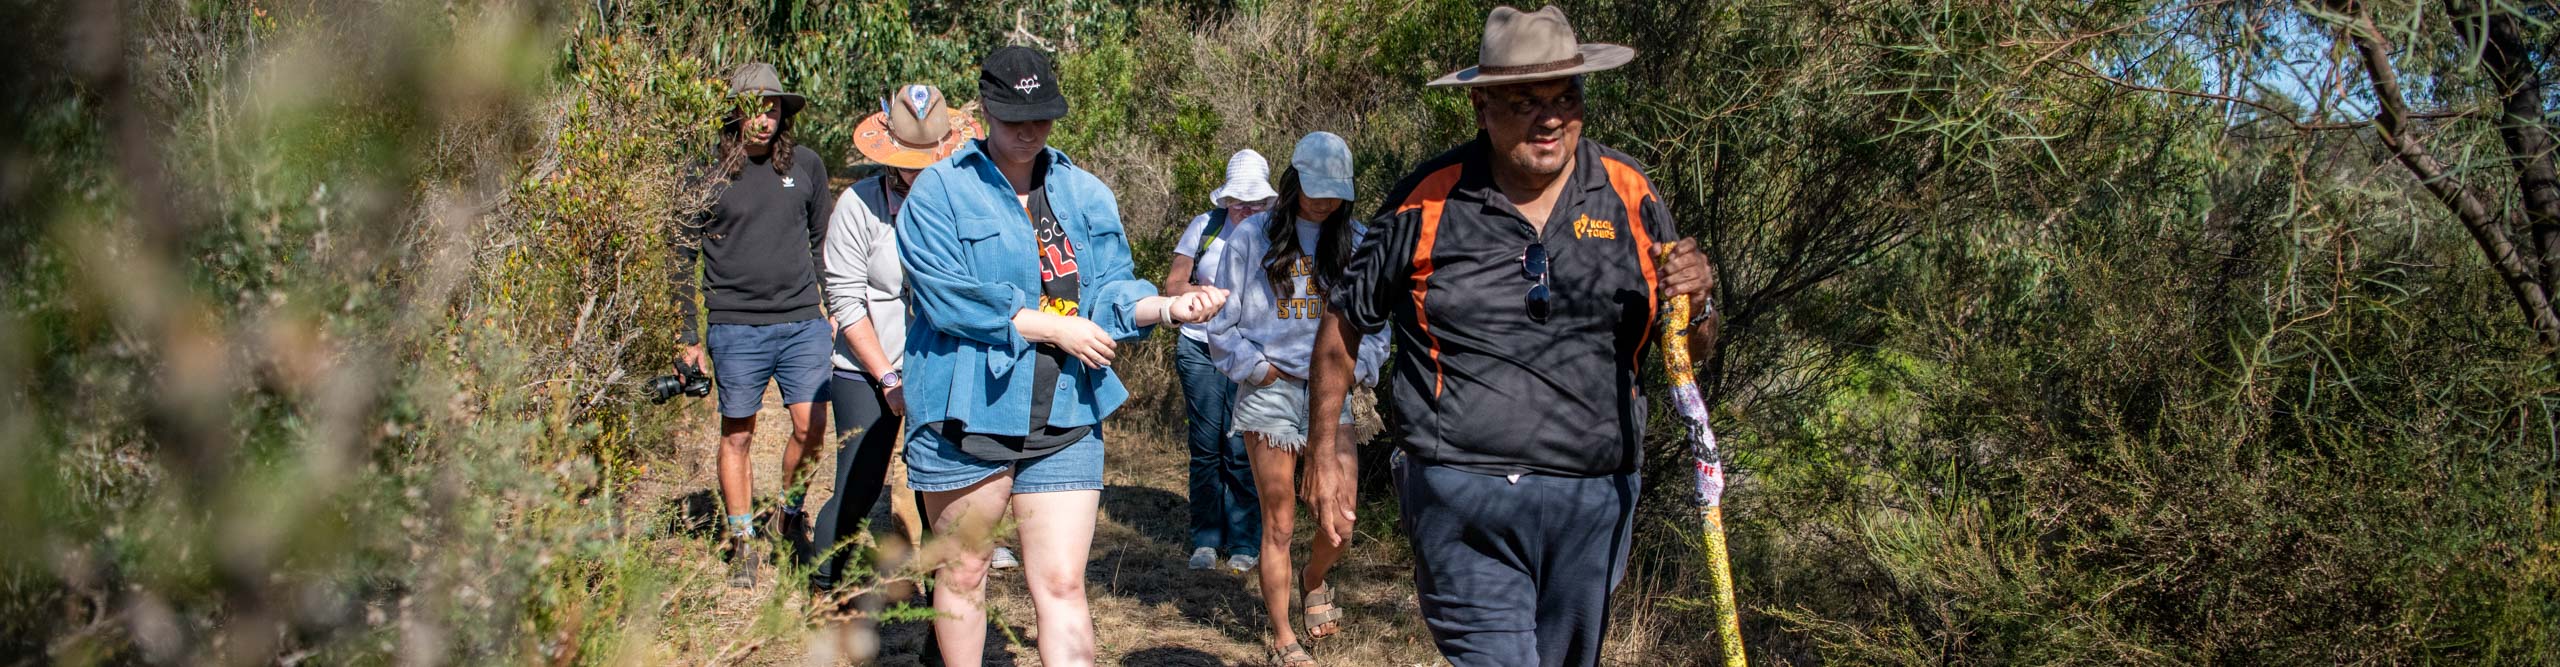 Travellers on First Nation Experience in Flinders Ranges